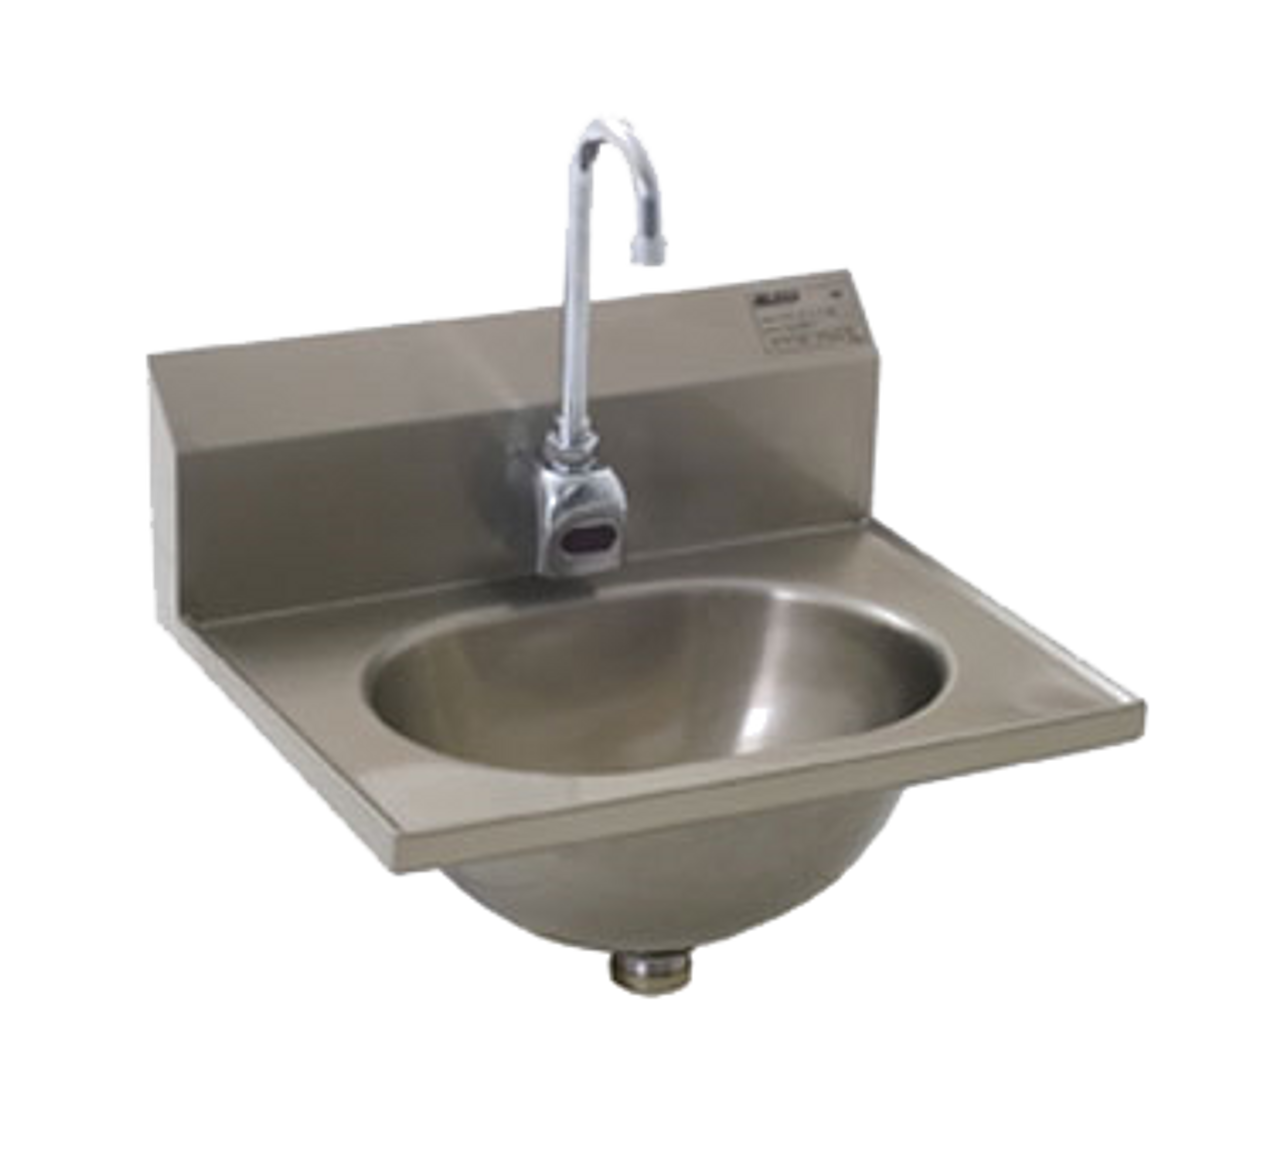 Hand Sink, wall mount, 13-1/2" wide x 9-3/4" front-to-back x 6-3/4" deep bowl, 304 stainless steel construction, electronic eye gooseneck spout, basket drain, deep-drawn positive drain sink bowl, 7-1/2"High backsplash, all welded, includes mounting brackets, inverted "V" edge, NSF